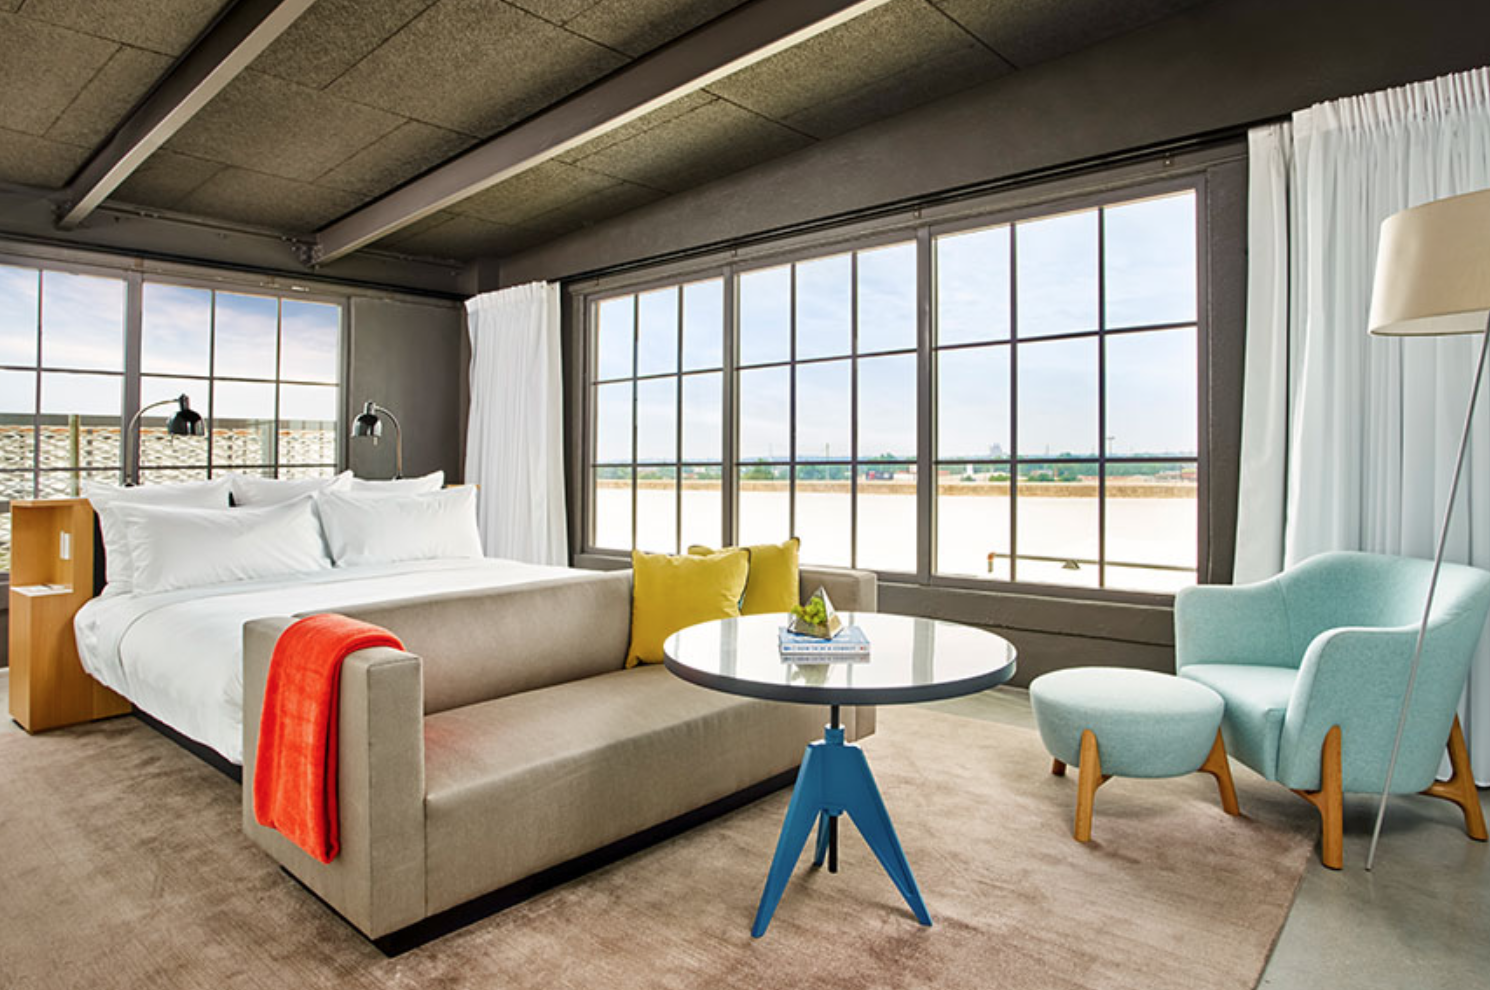 The 2-bedroom 21c Suite at the 21c Museum Hotel in Oklahoma City, Oklahoma